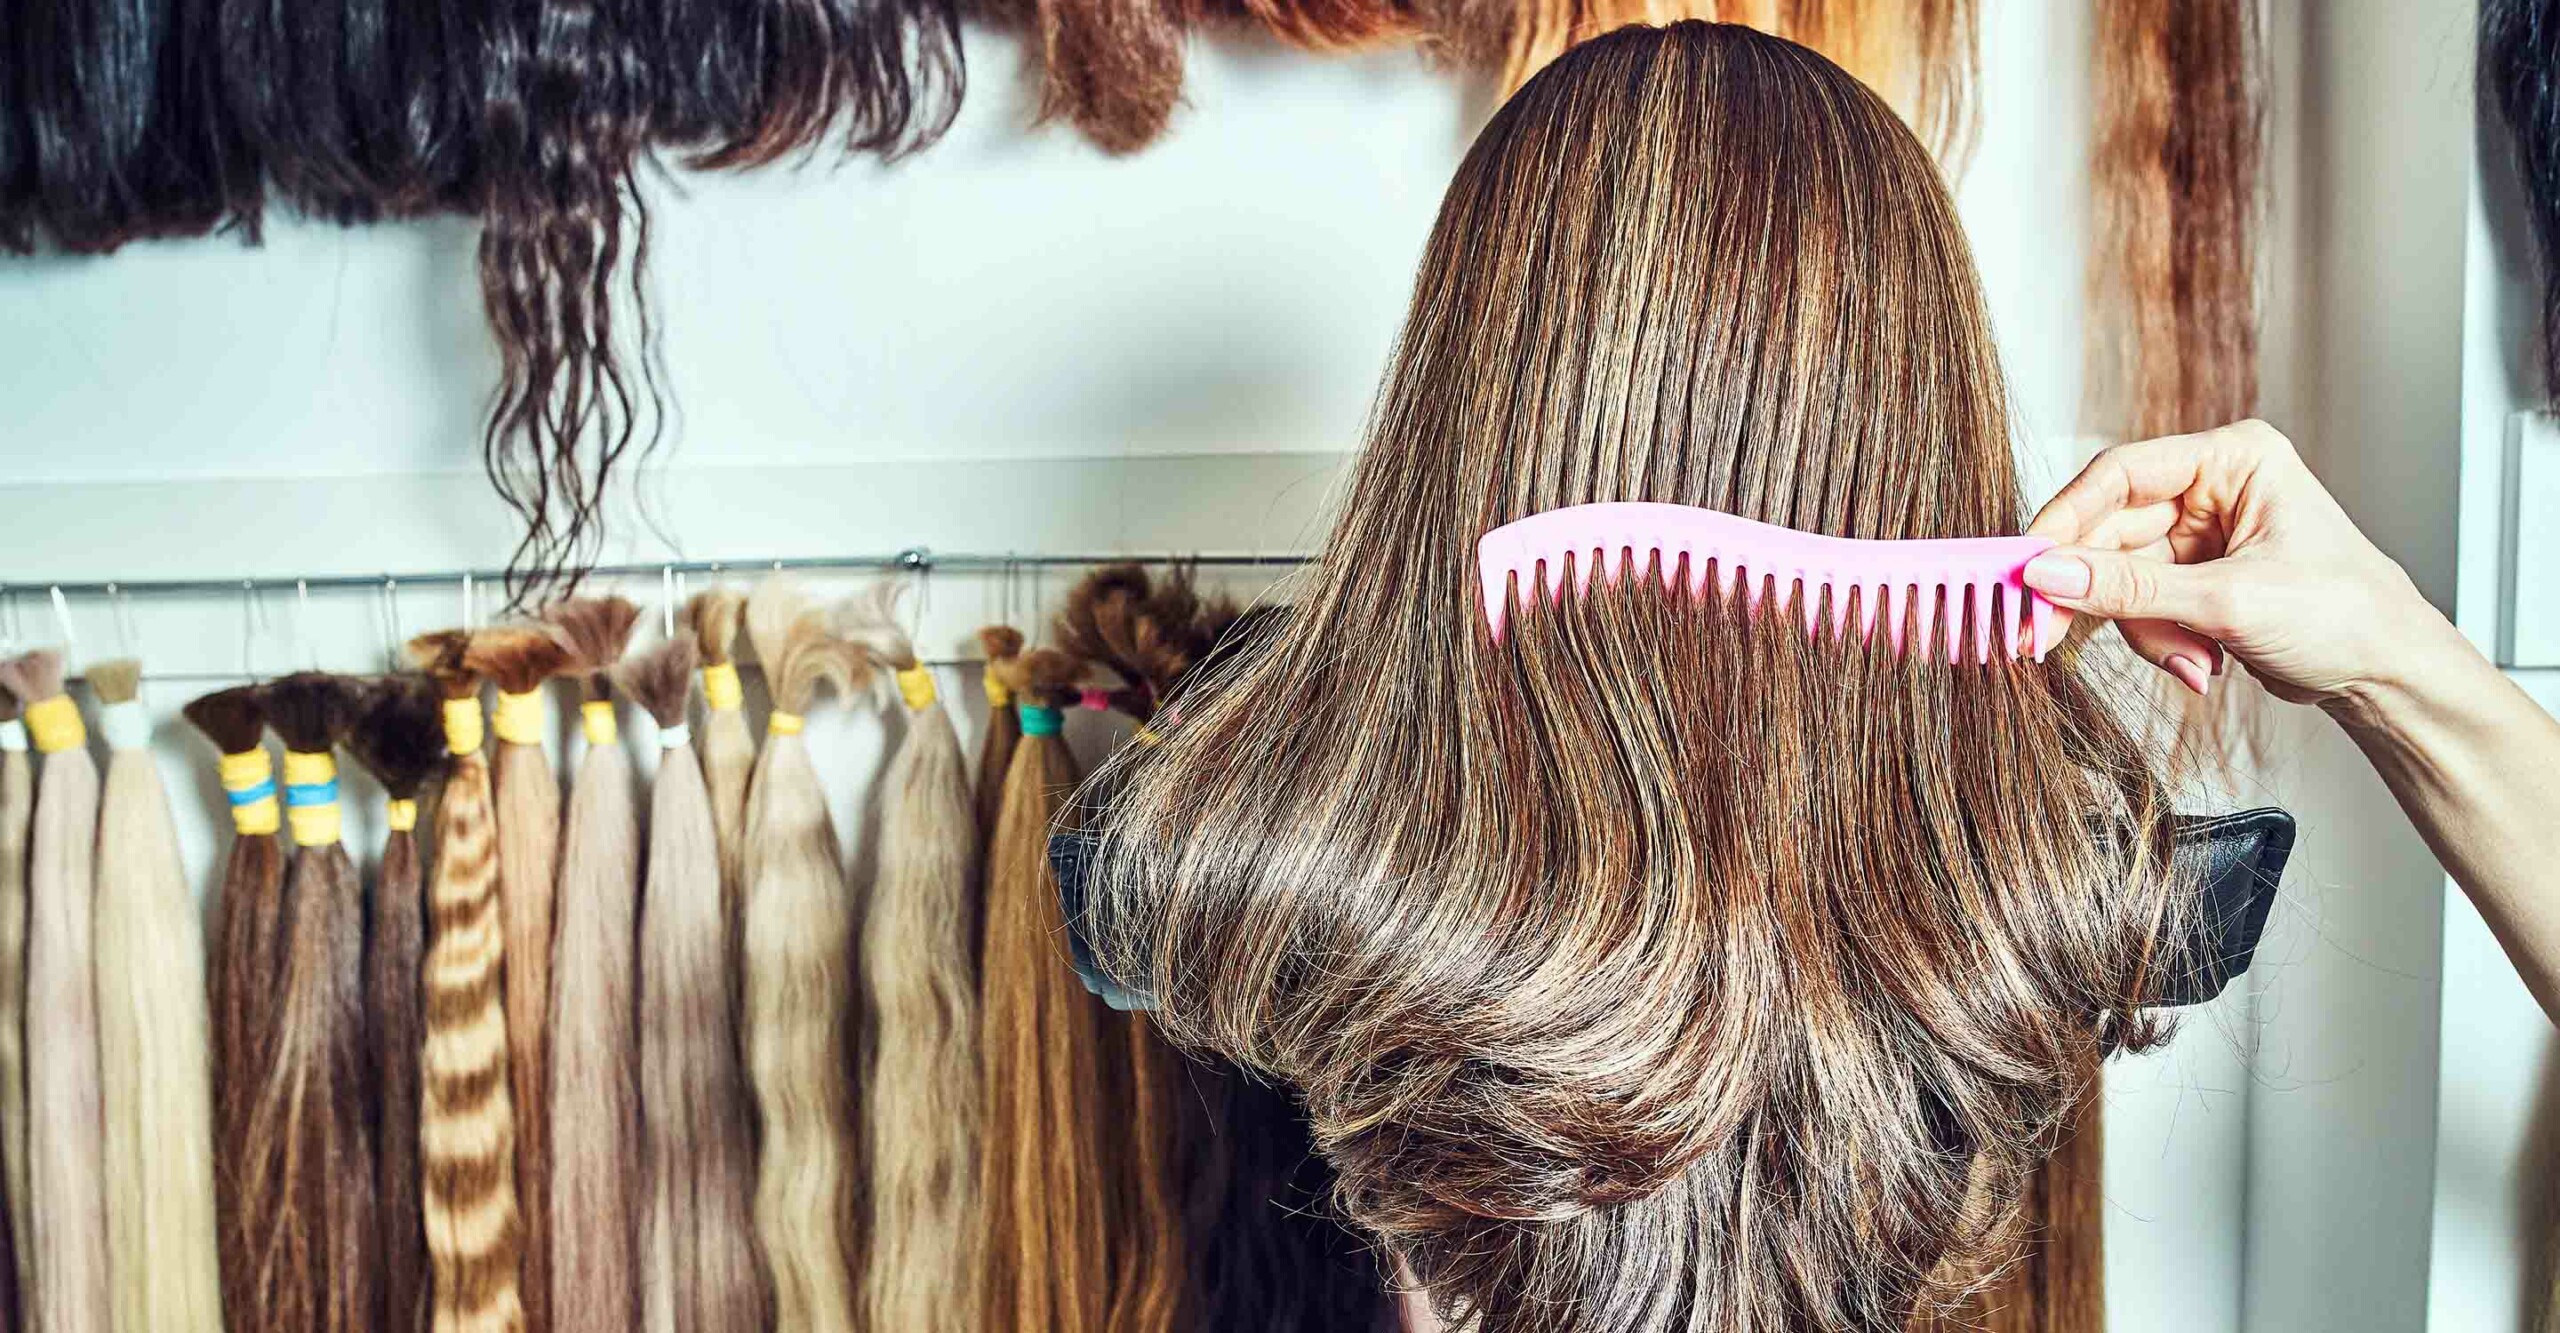 hand combing brunette wig with a pink comb in the foreground, collection of hair extensions of different hair colors hung along the wall in the background